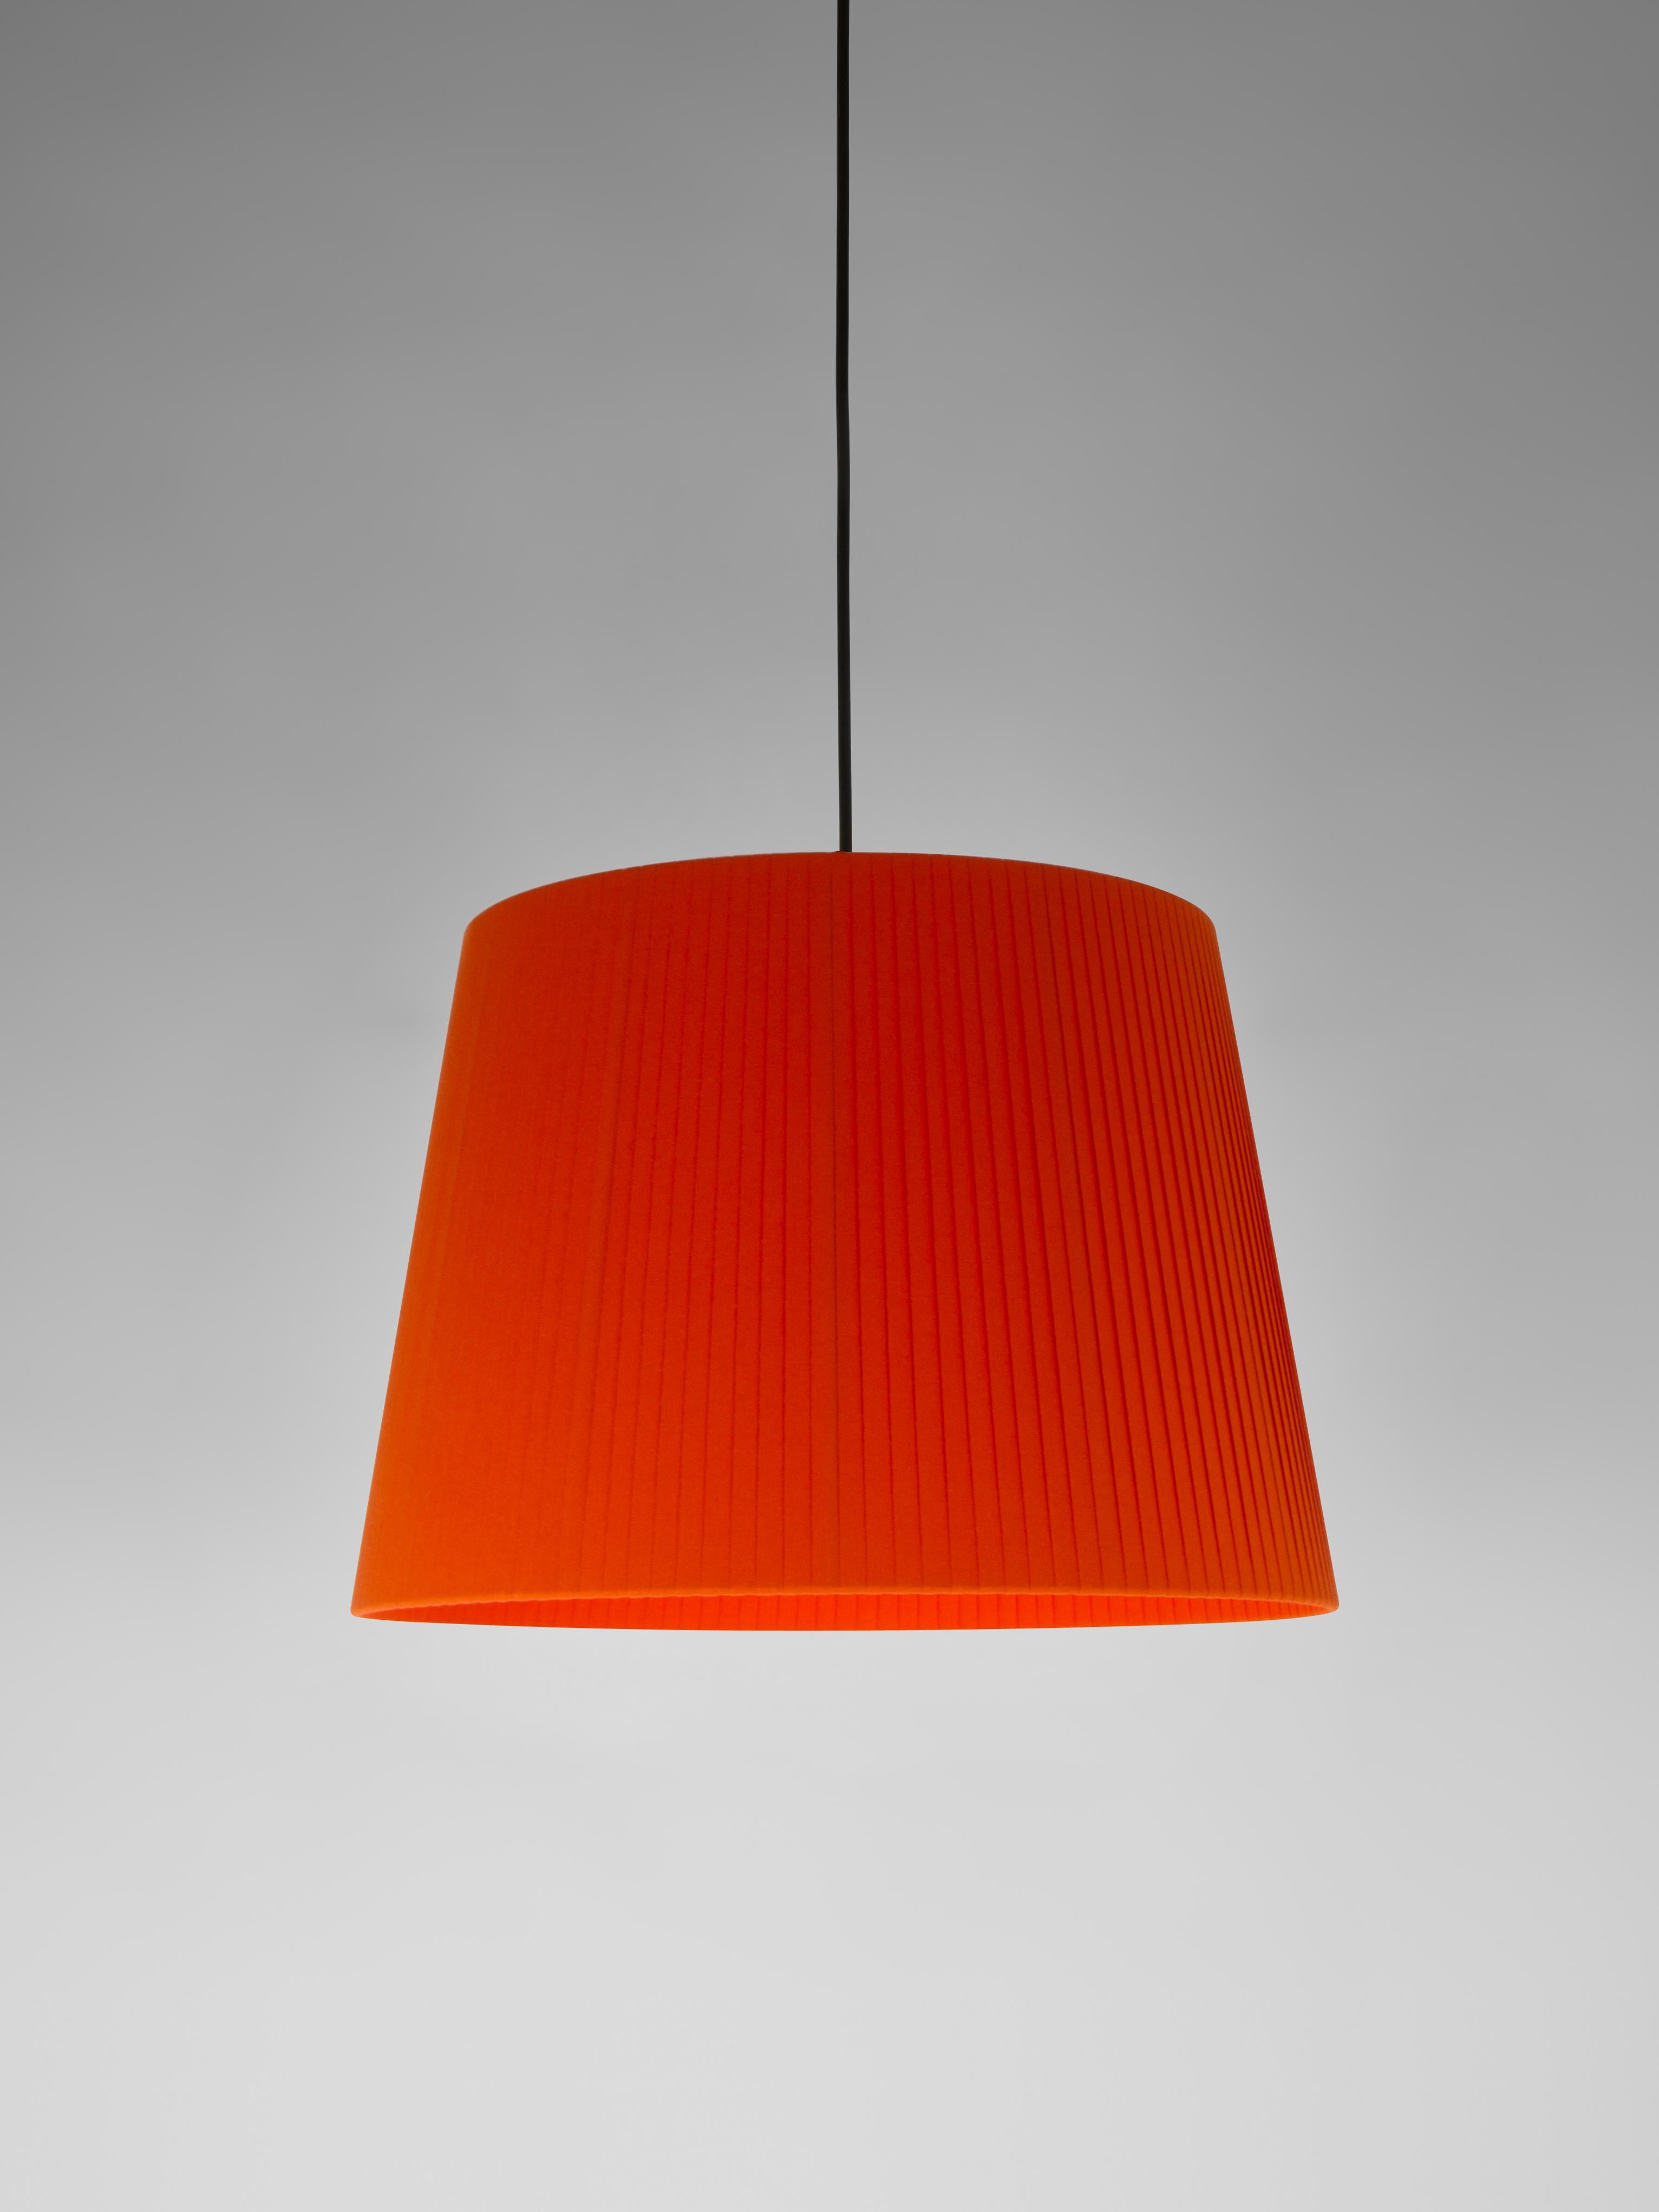 Red Sísísí Cónicas GT1 pendant lamp by Santa & Cole
Dimensions: D 45 x H 32 cm
Materials: Metal, ribbon.
Available in other colors.
Also available in two lights version.

The conical shape group has multiple finishes and sizes. It consists of